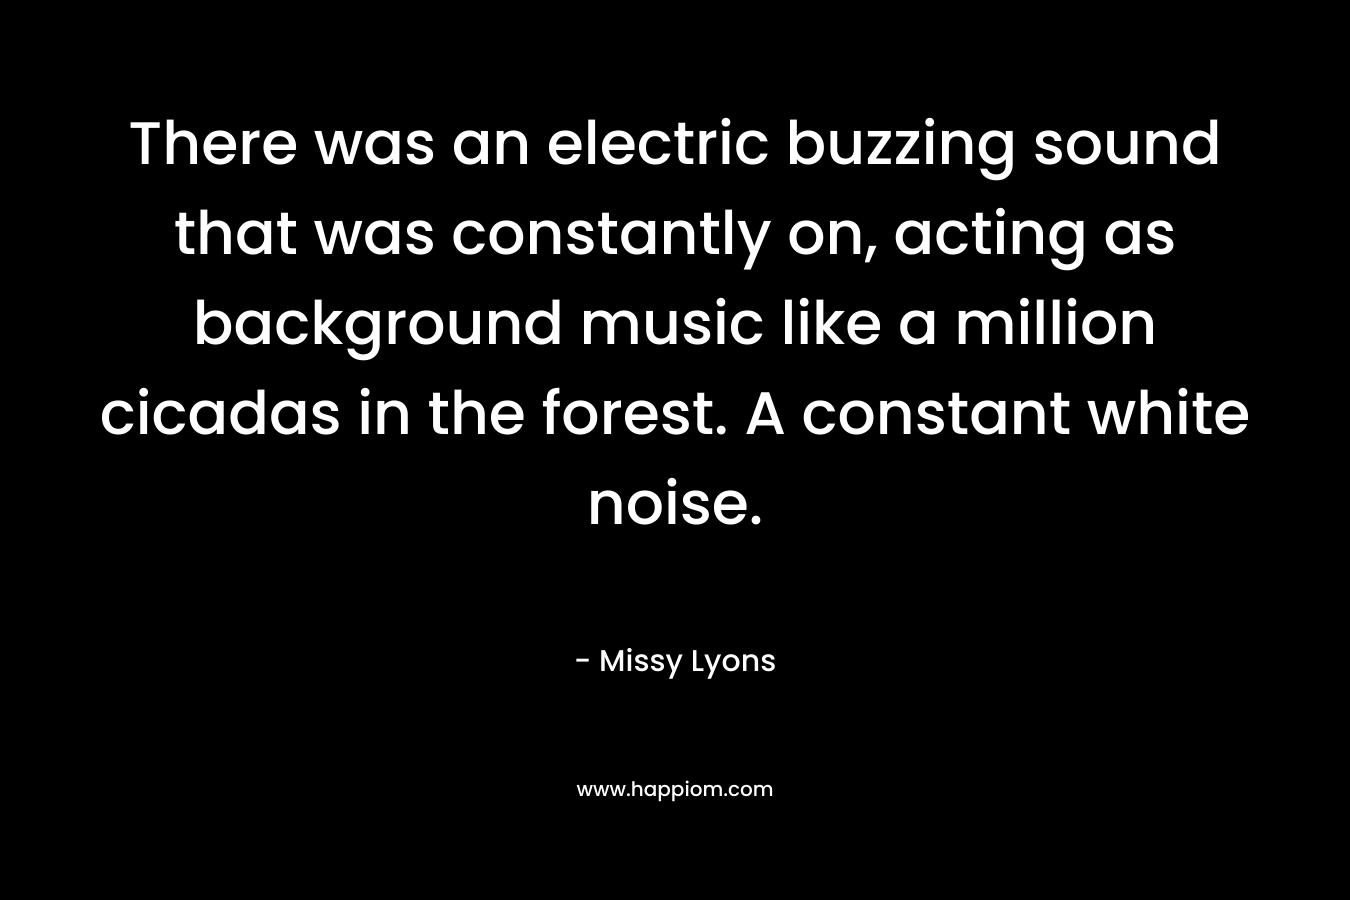 There was an electric buzzing sound that was constantly on, acting as background music like a million cicadas in the forest. A constant white noise. – Missy Lyons